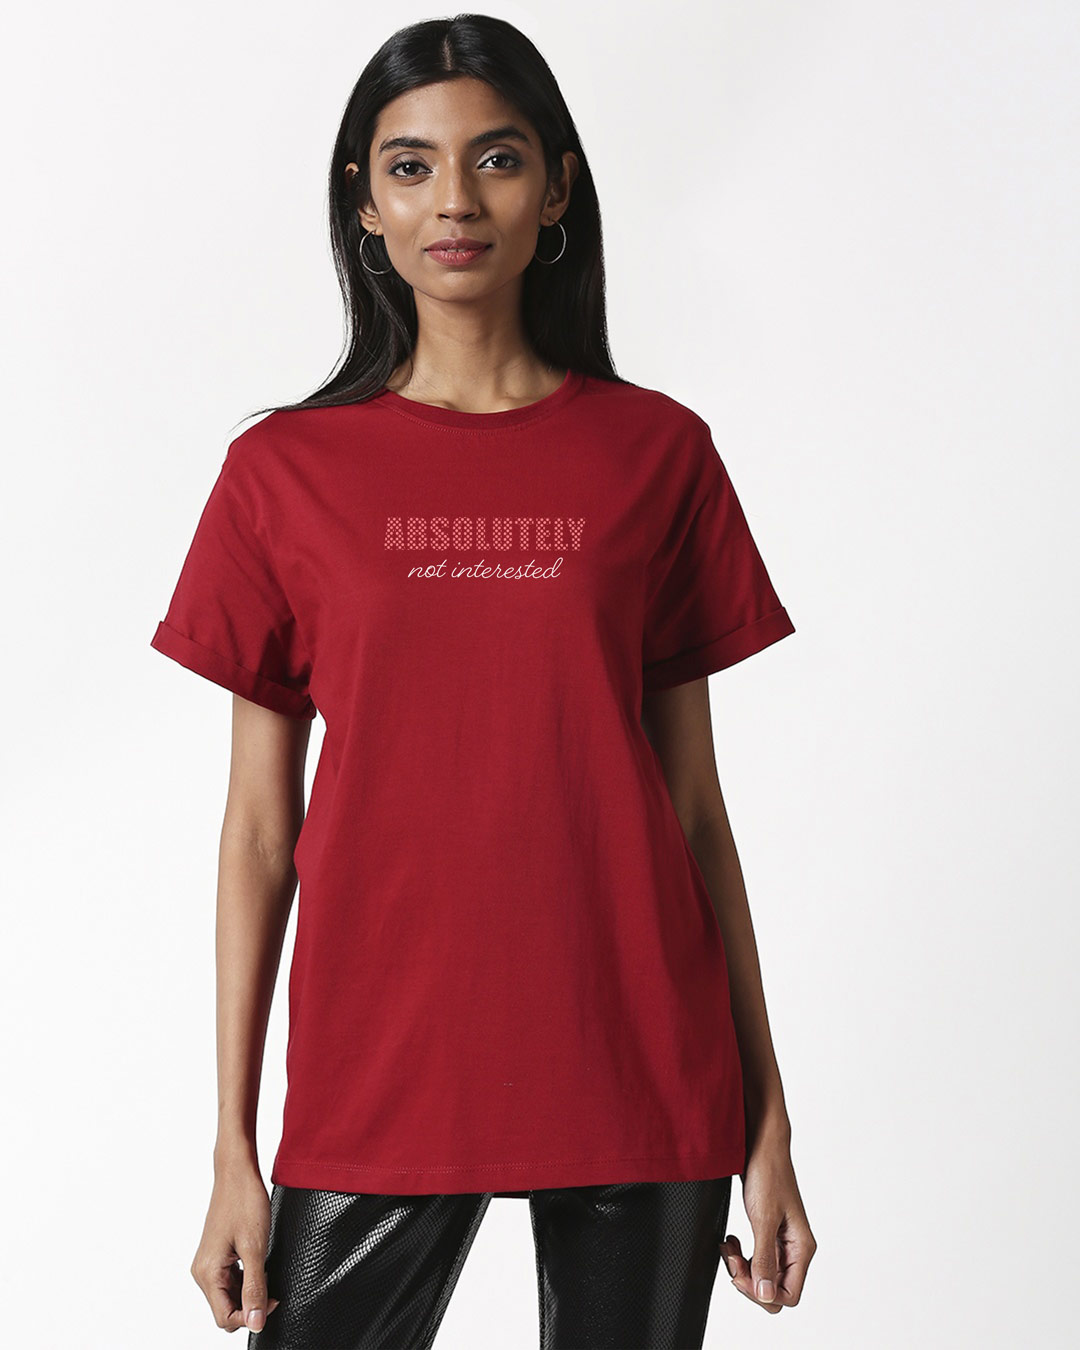 Shop Absolutely not Interested Boyfriend T-Shirt Cherry Red-Back